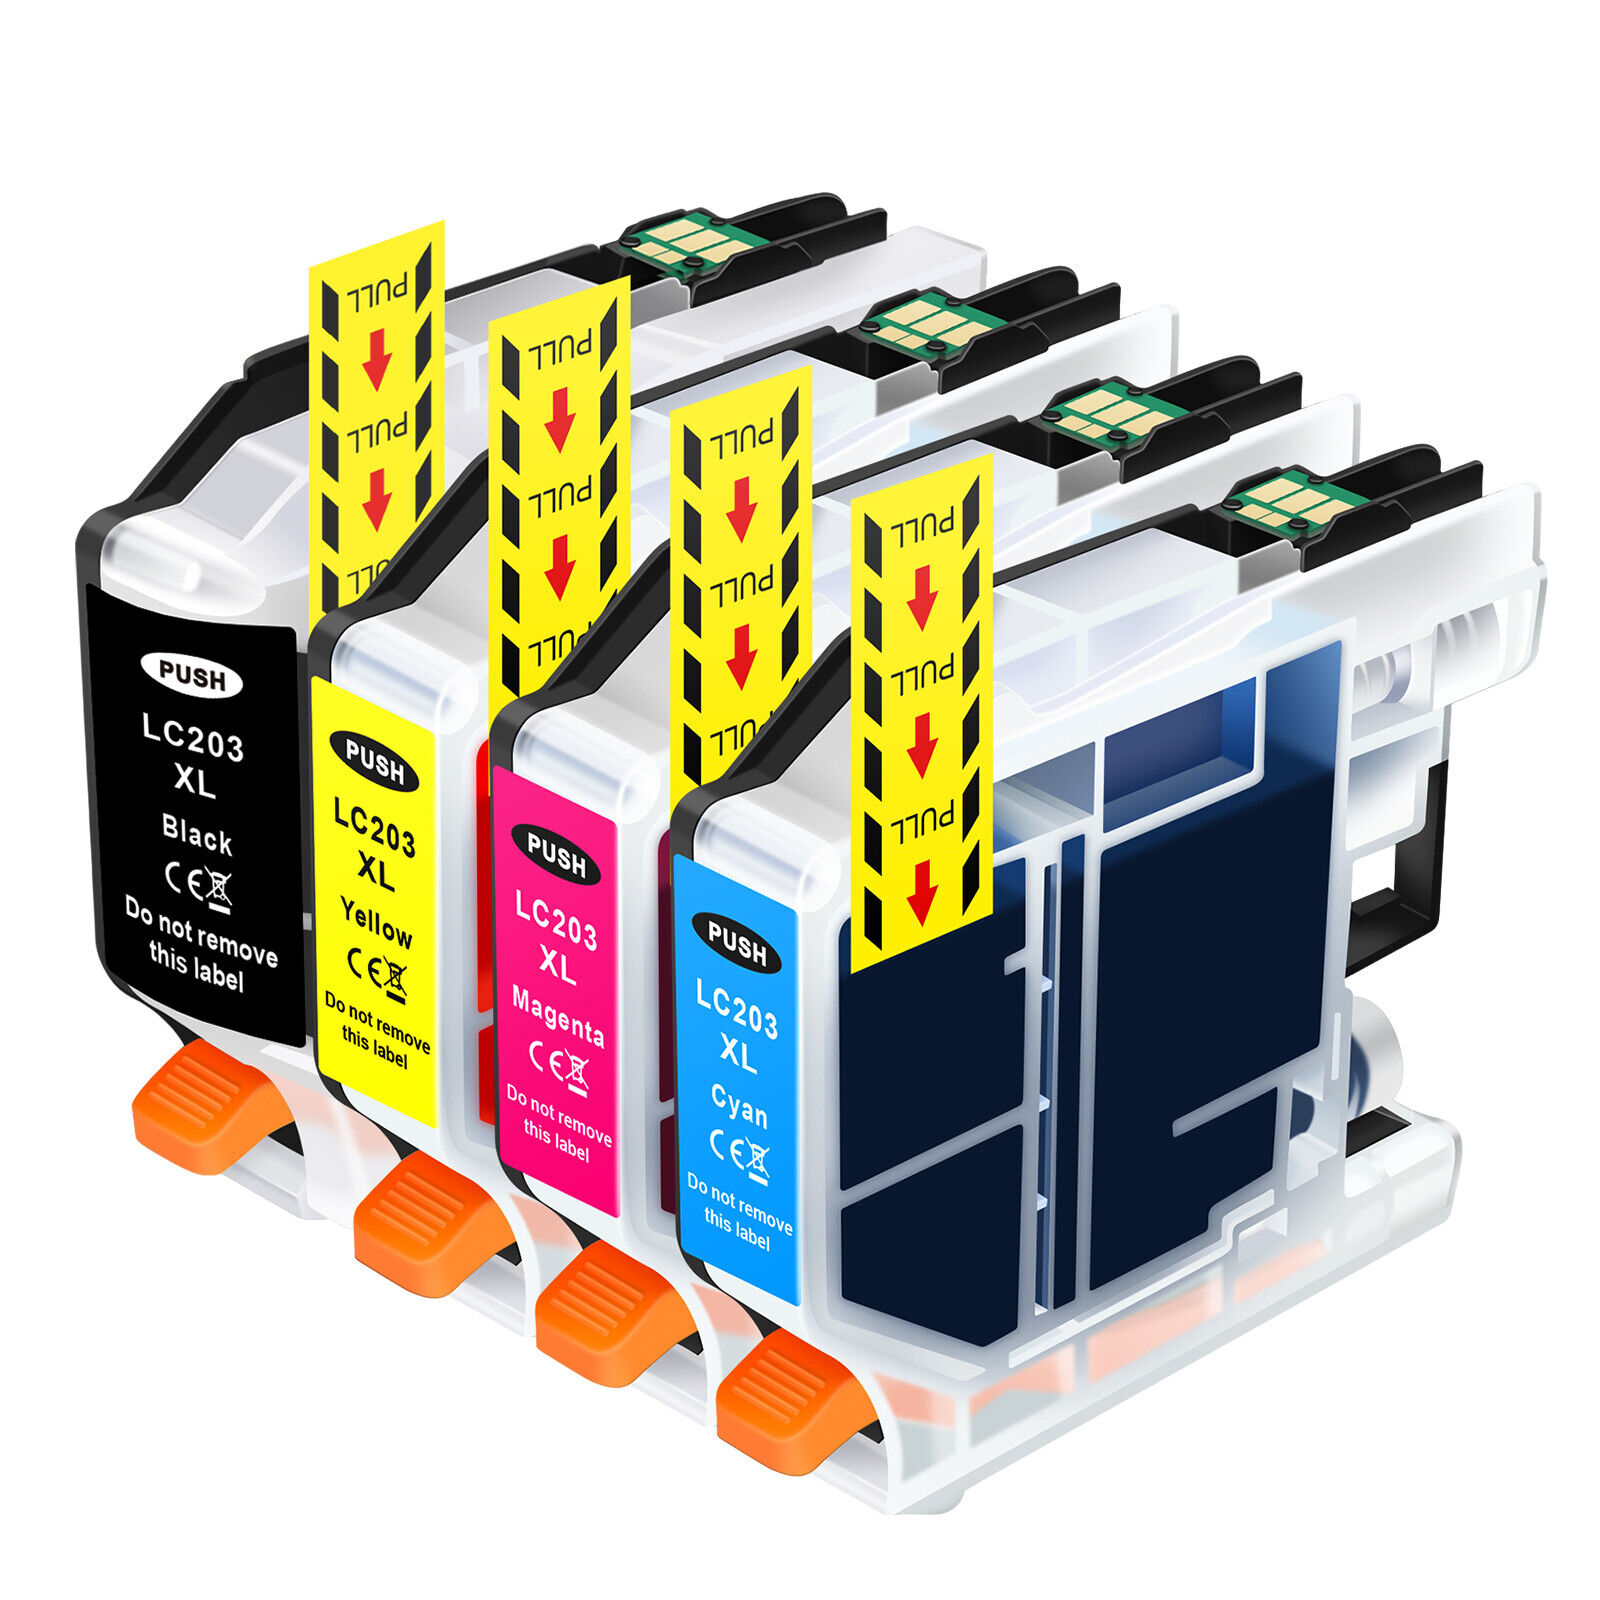 4PK Ink Cartridge for Brother LC203 LC201 MFC-J460DW MFC-J480DW MFC-J485DW Lot